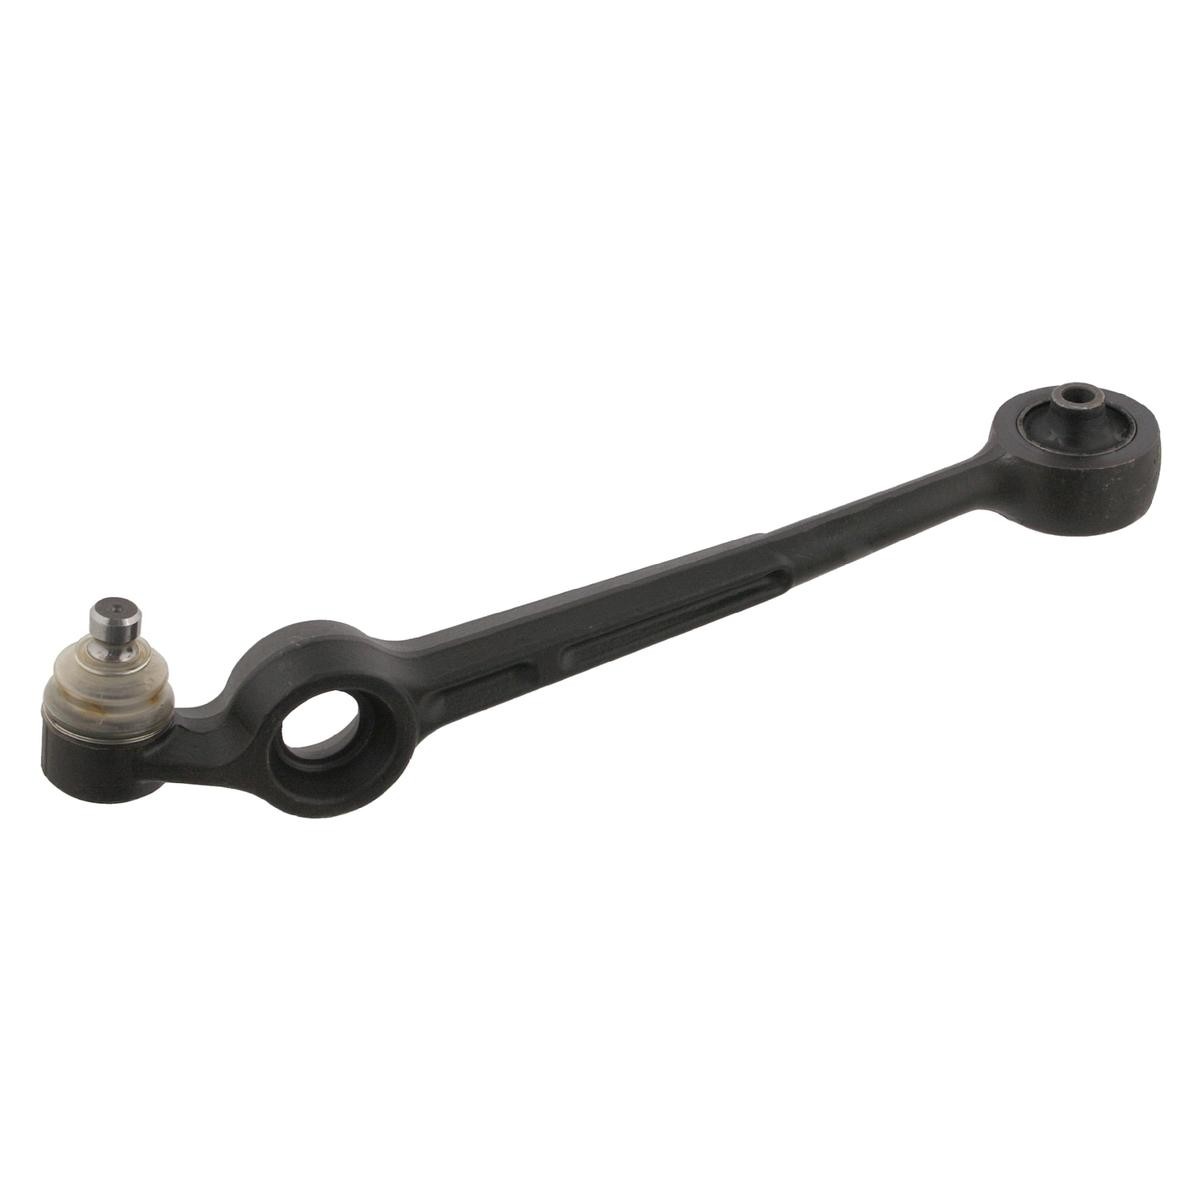 FEBI BILSTEIN 01264 Suspension arm with bearing(s), Front Axle Left, Lower, Control Arm, Cast Steel